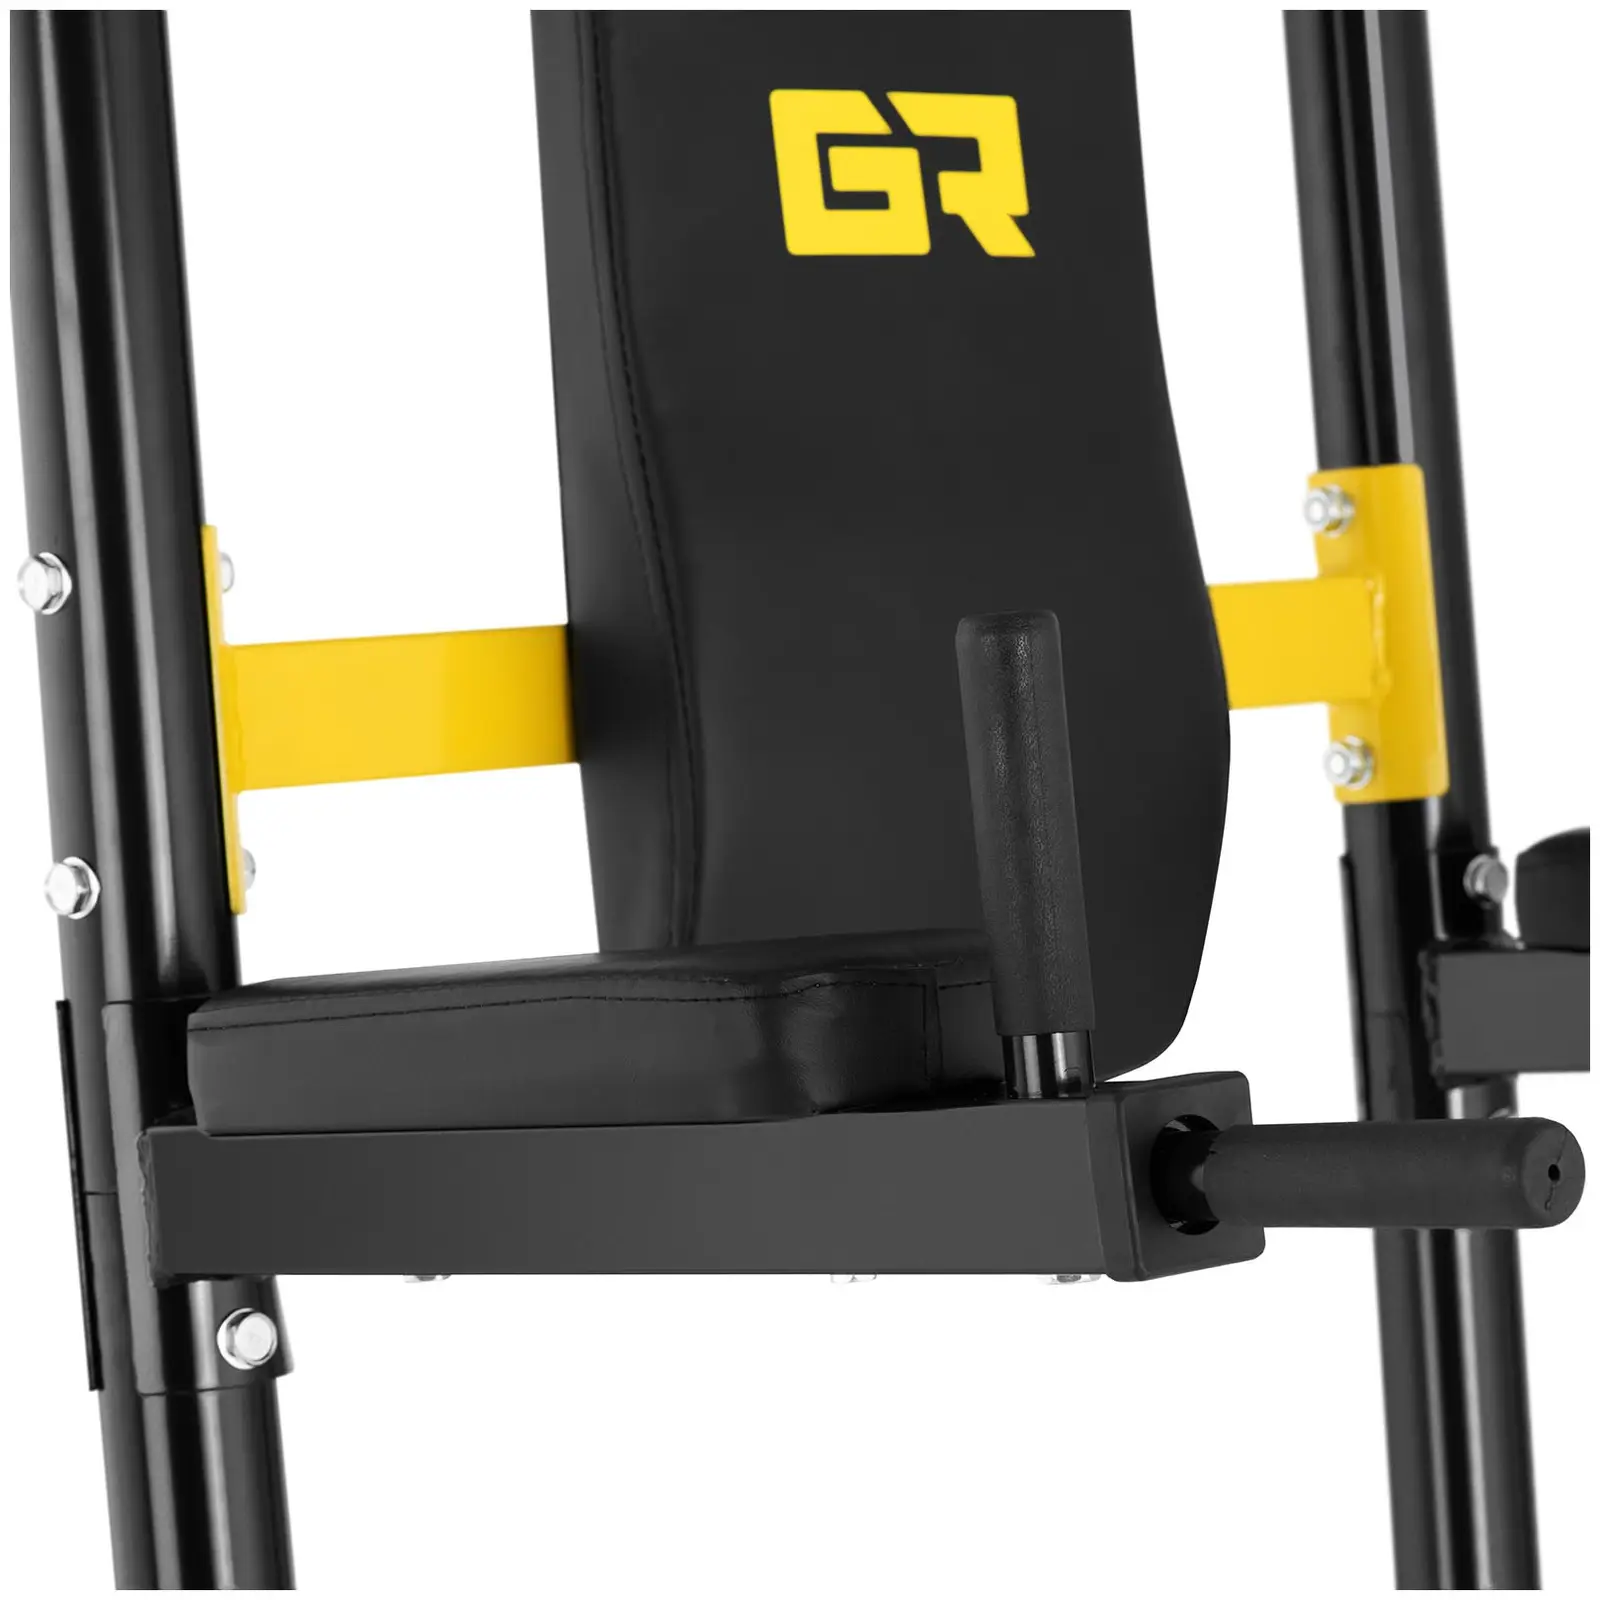 Power tower - Stazione dips, pull up, push up - 120 kg